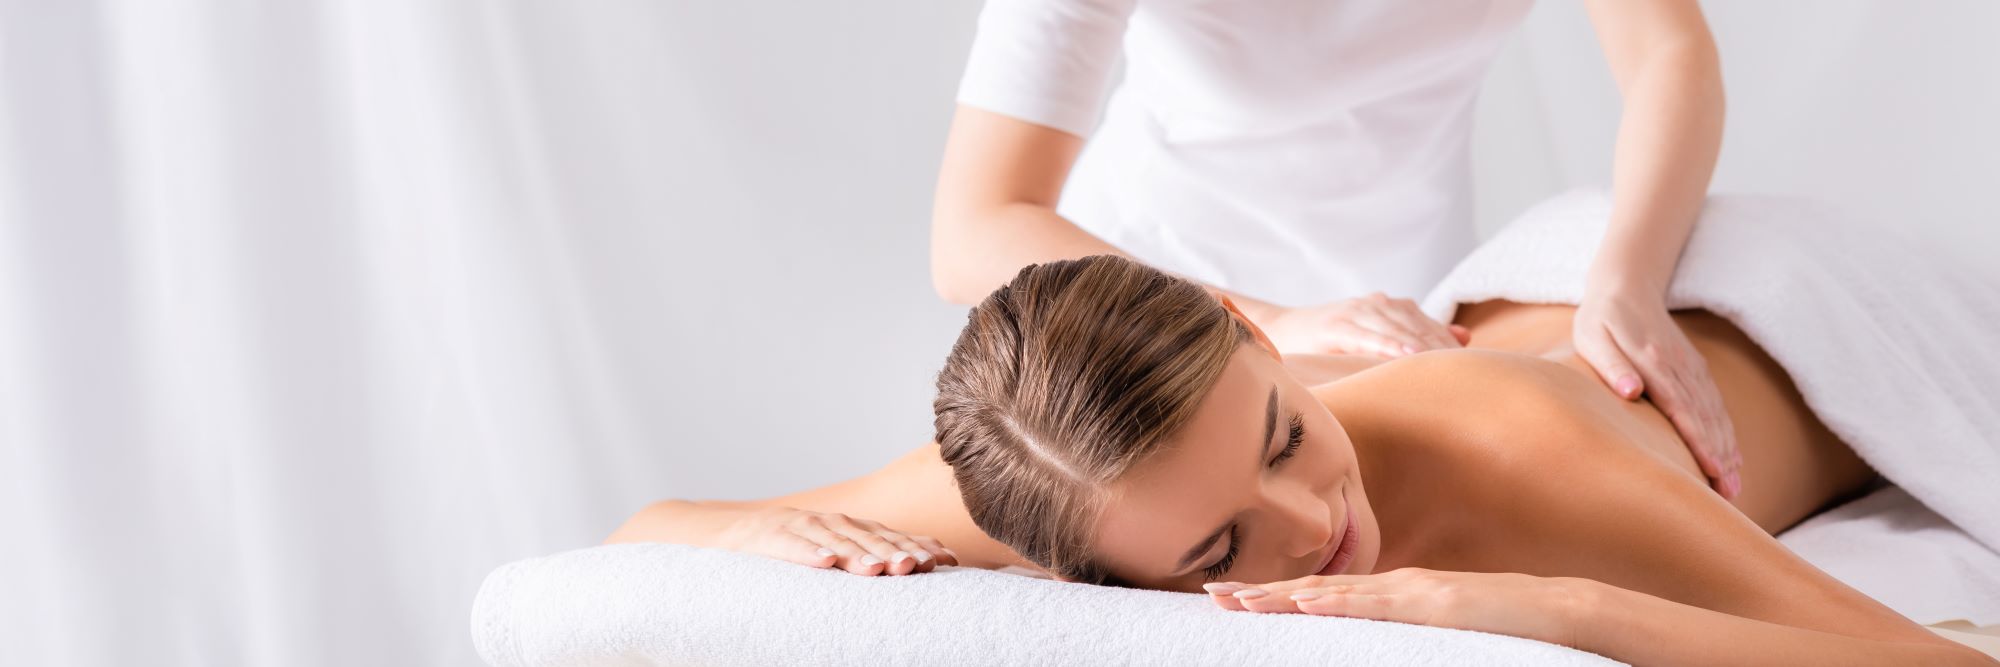 Massage Therapy Vancouver